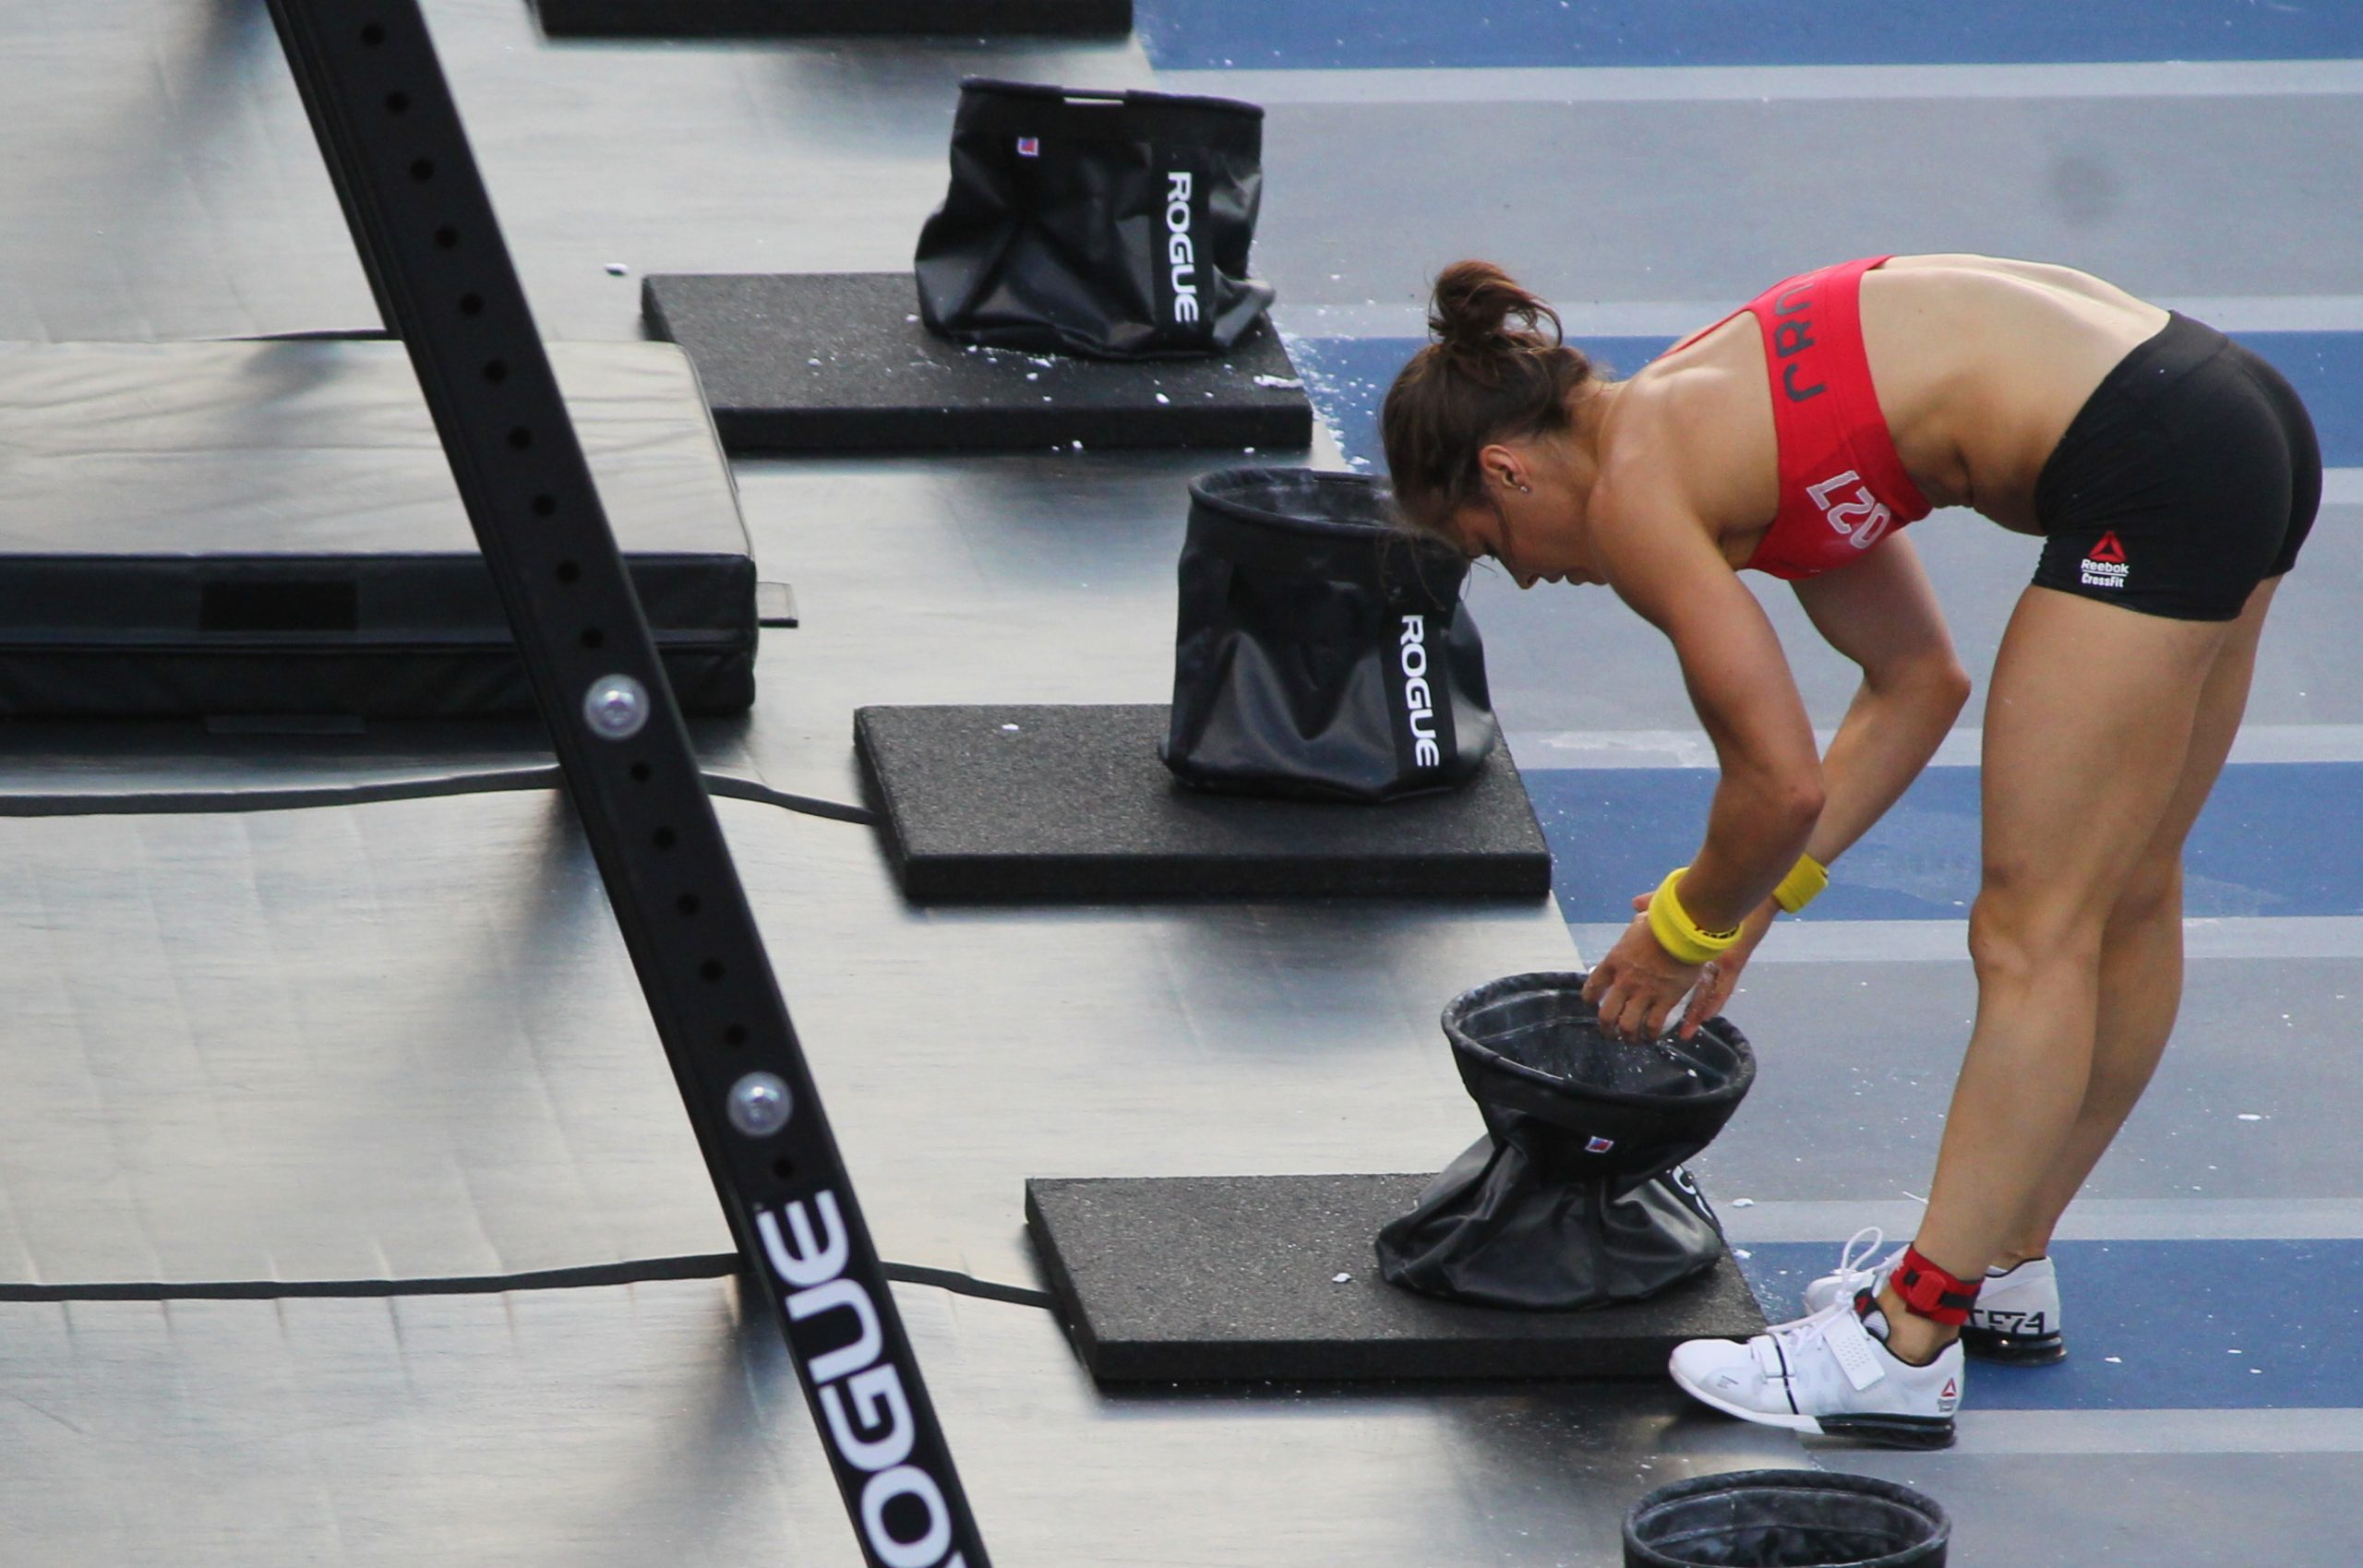 Julie Foucher before jumping on the last bar. 